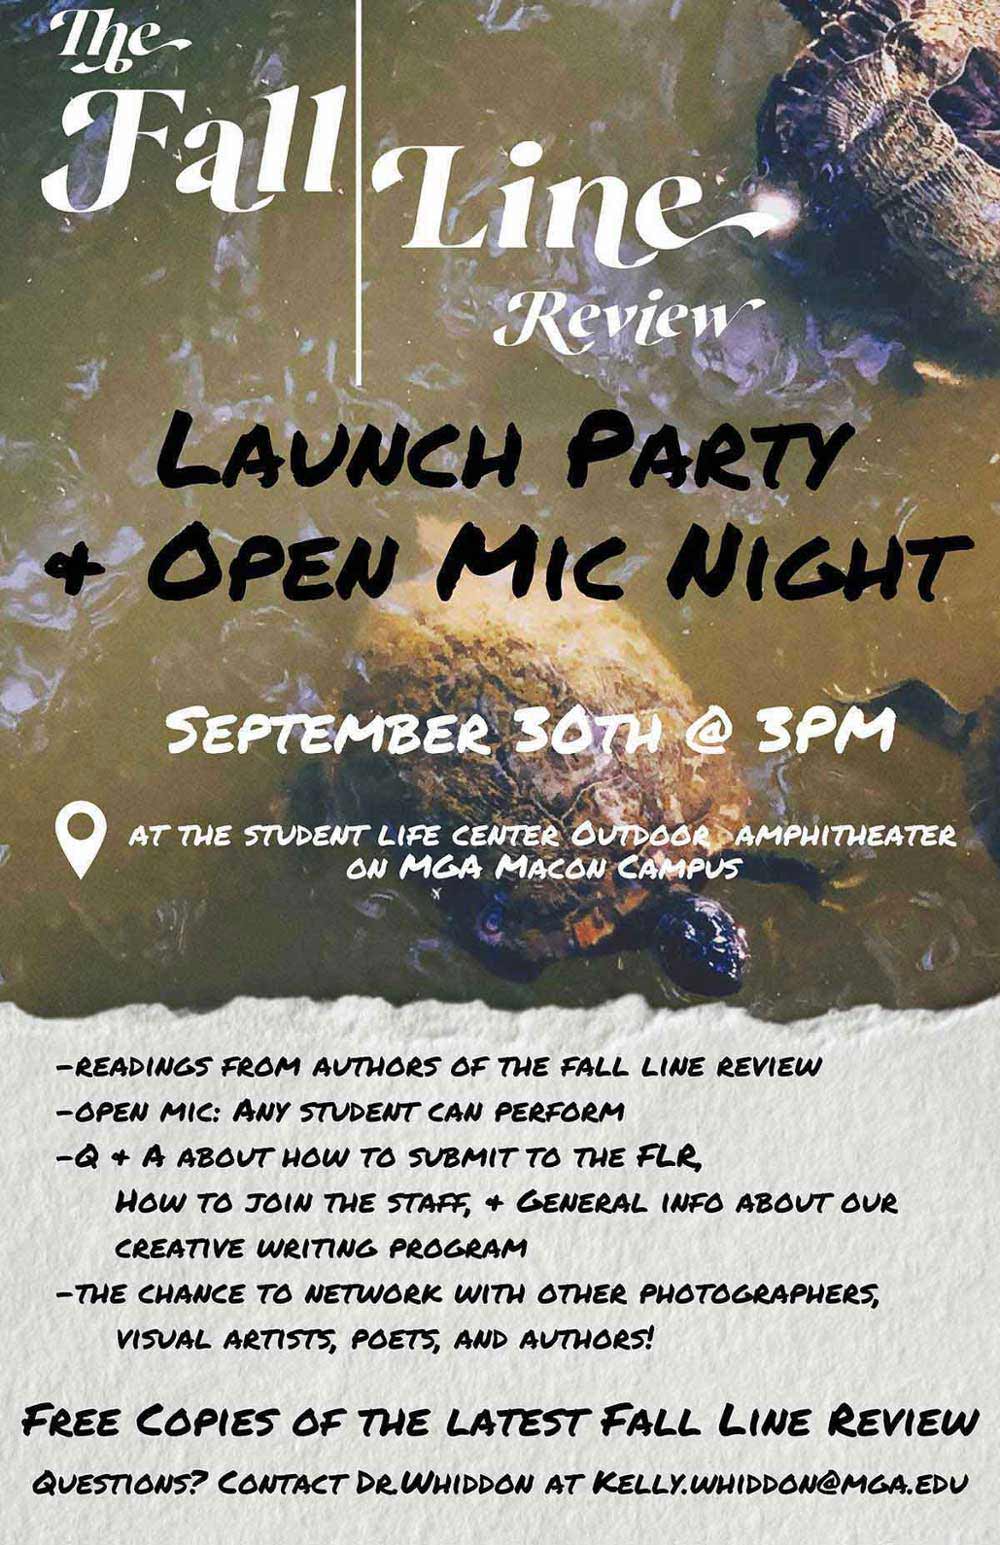 The Fall Line Review Launch Party will be held Thursday, September 30 at 3 p.m. in the outdoor amphitheater in front of the Student Life Center on the Macon Campus.